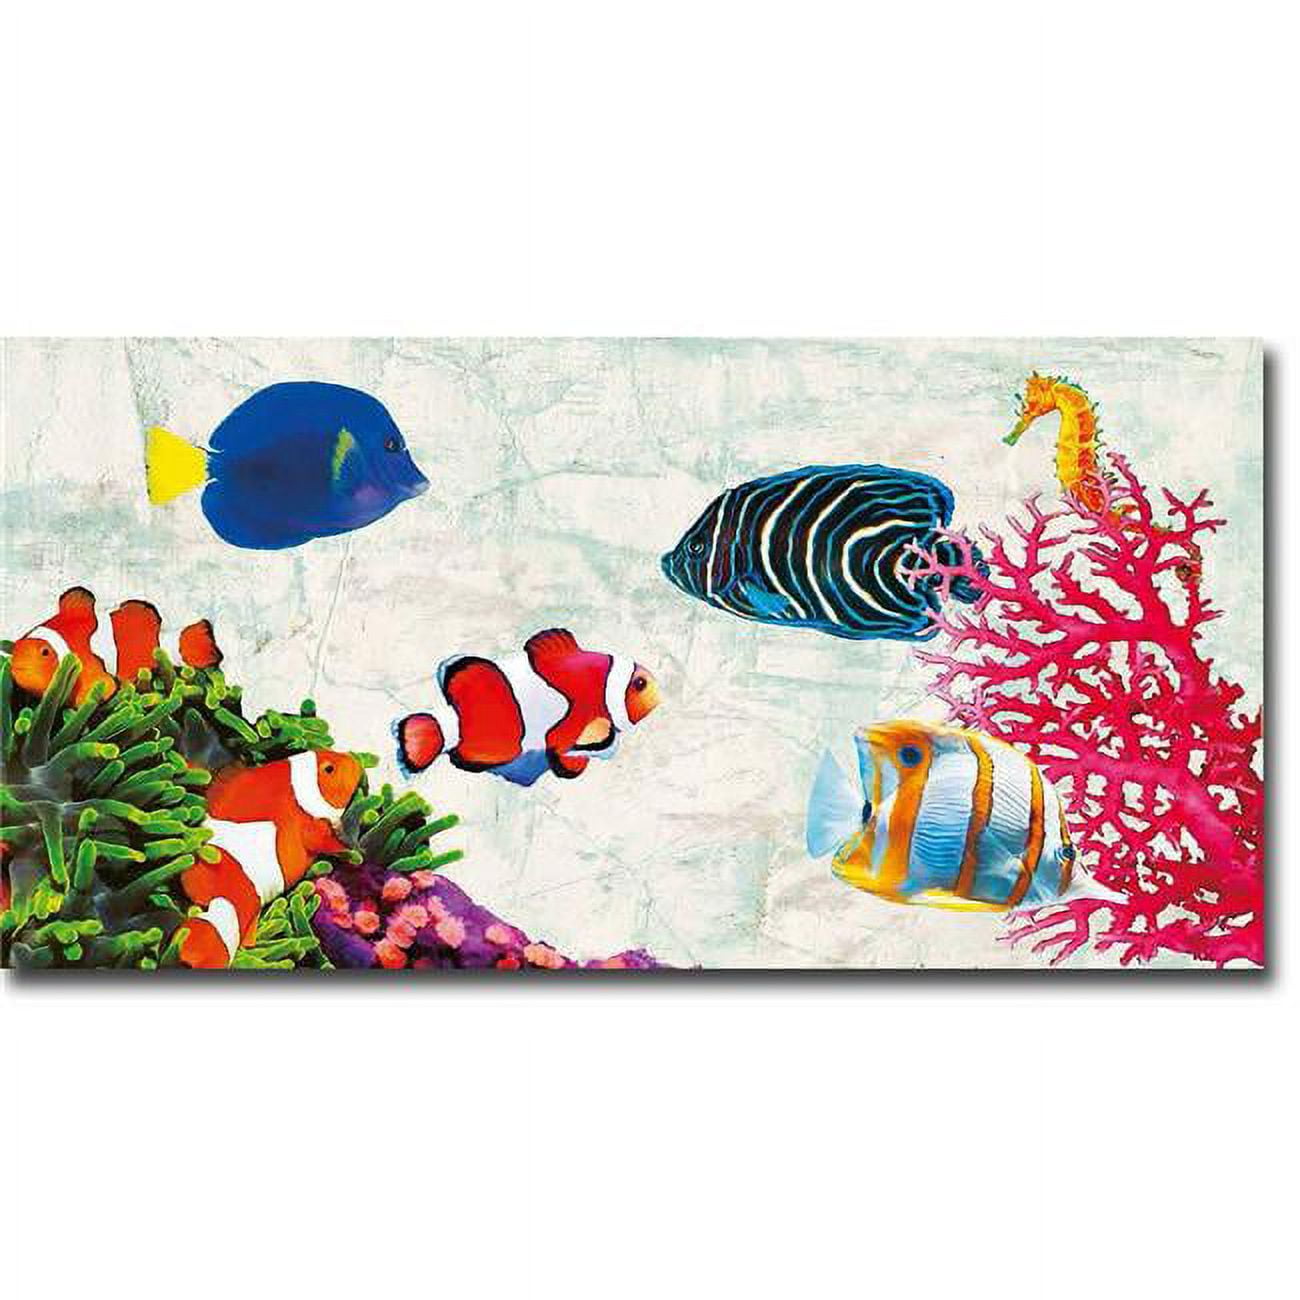 1224am537sag Tropical People By Teo Rizzardi Premium Gallery Wrapped Canvas Giclee Art - Ready To Hang, 12 X 24 X 1.5 In.